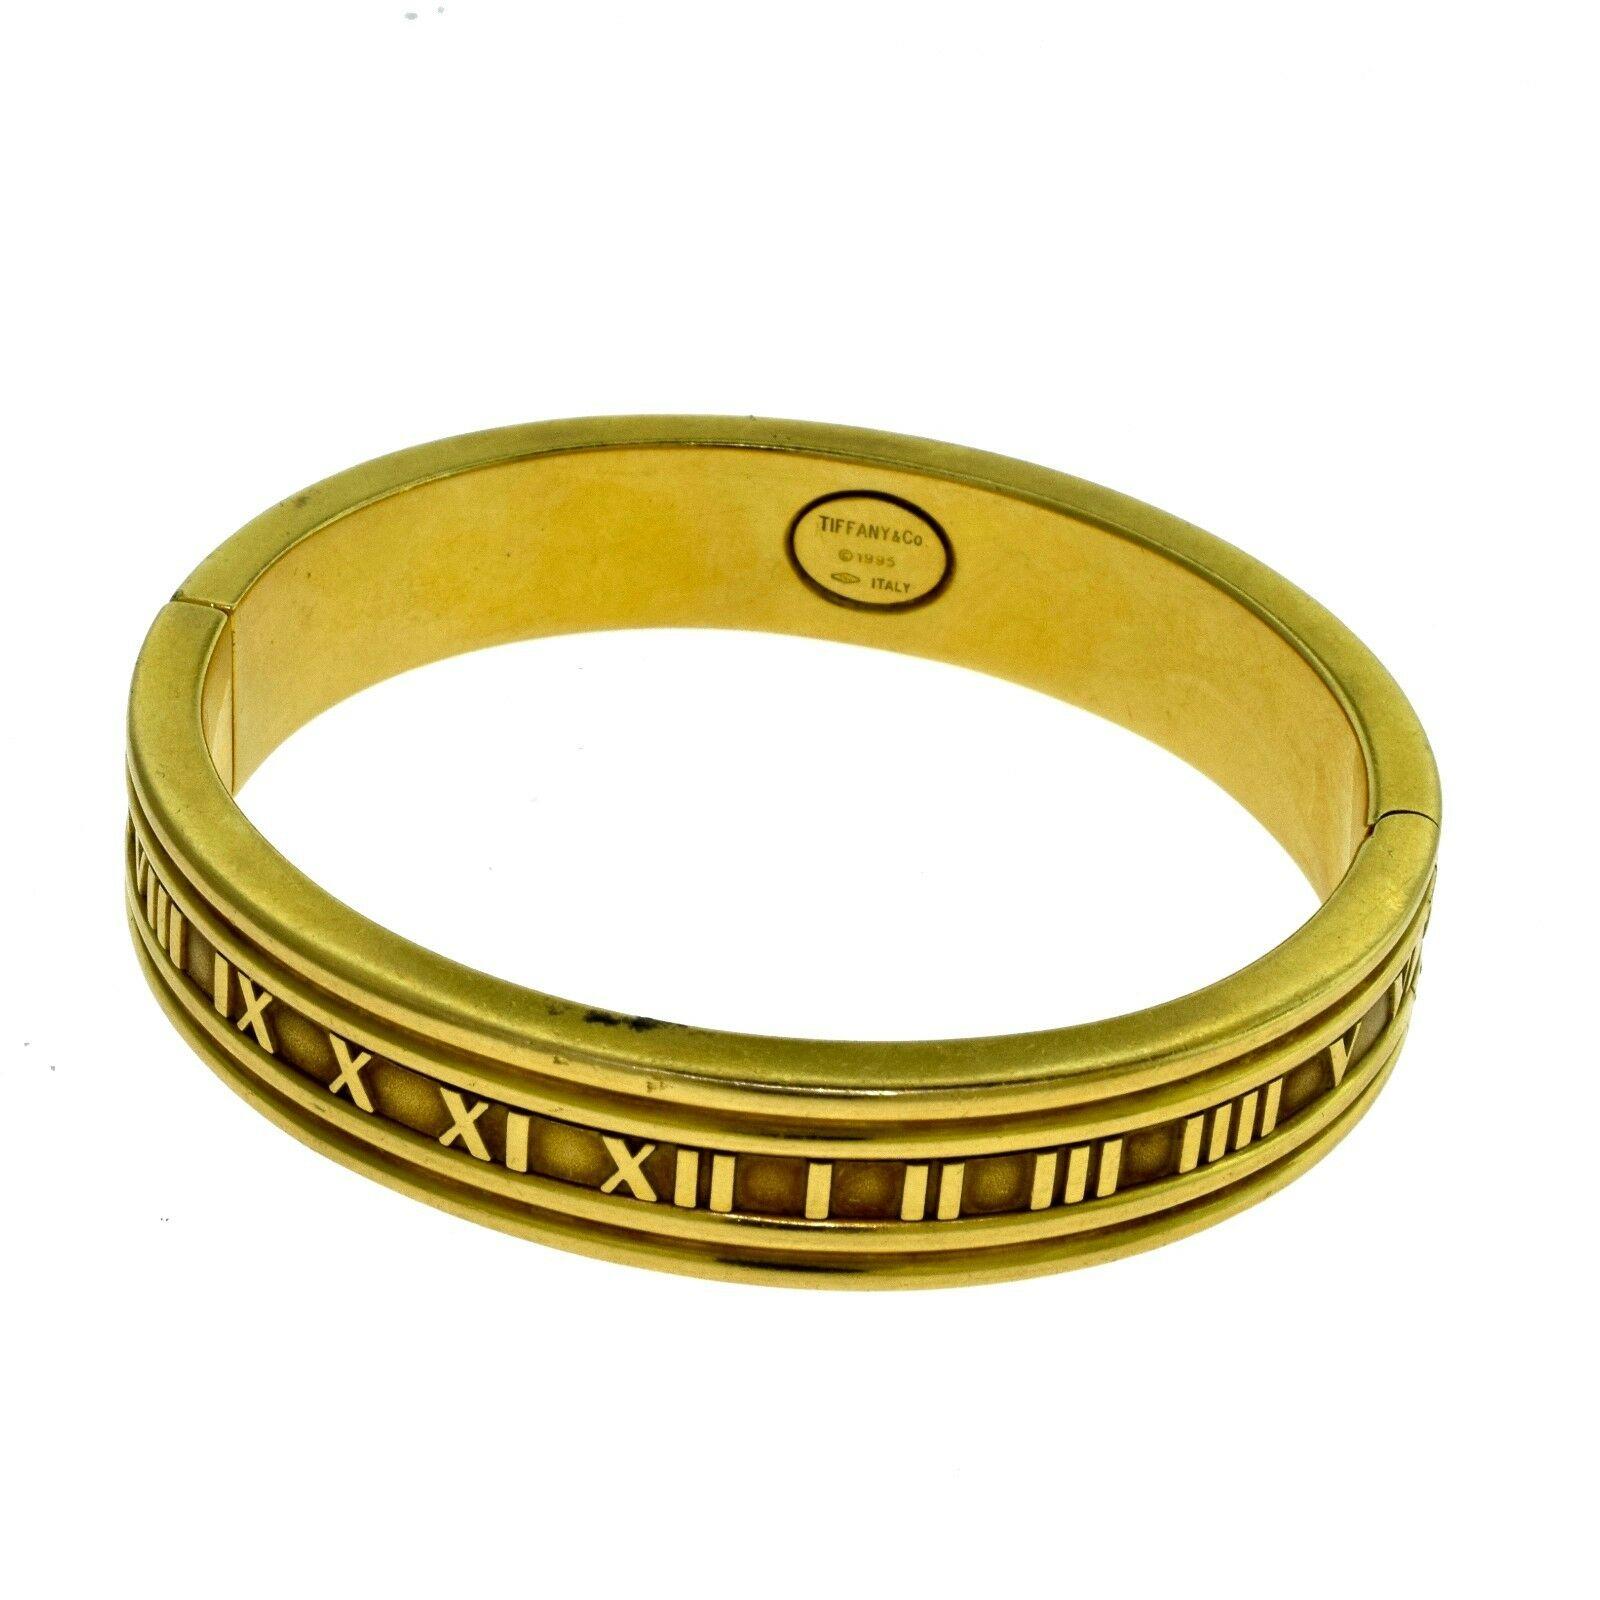 Brilliance Jewels, Miami
Questions? Call Us Anytime!
786,482,8100

Type: Bangle

Designer: Tiffany & Co.

Collection: Atlas

Metal: Yellow Gold

Metal Purity: 18k

Total Item Weight : 45.3 grams

North-South Inner Dimensions: 2 inches

East-West